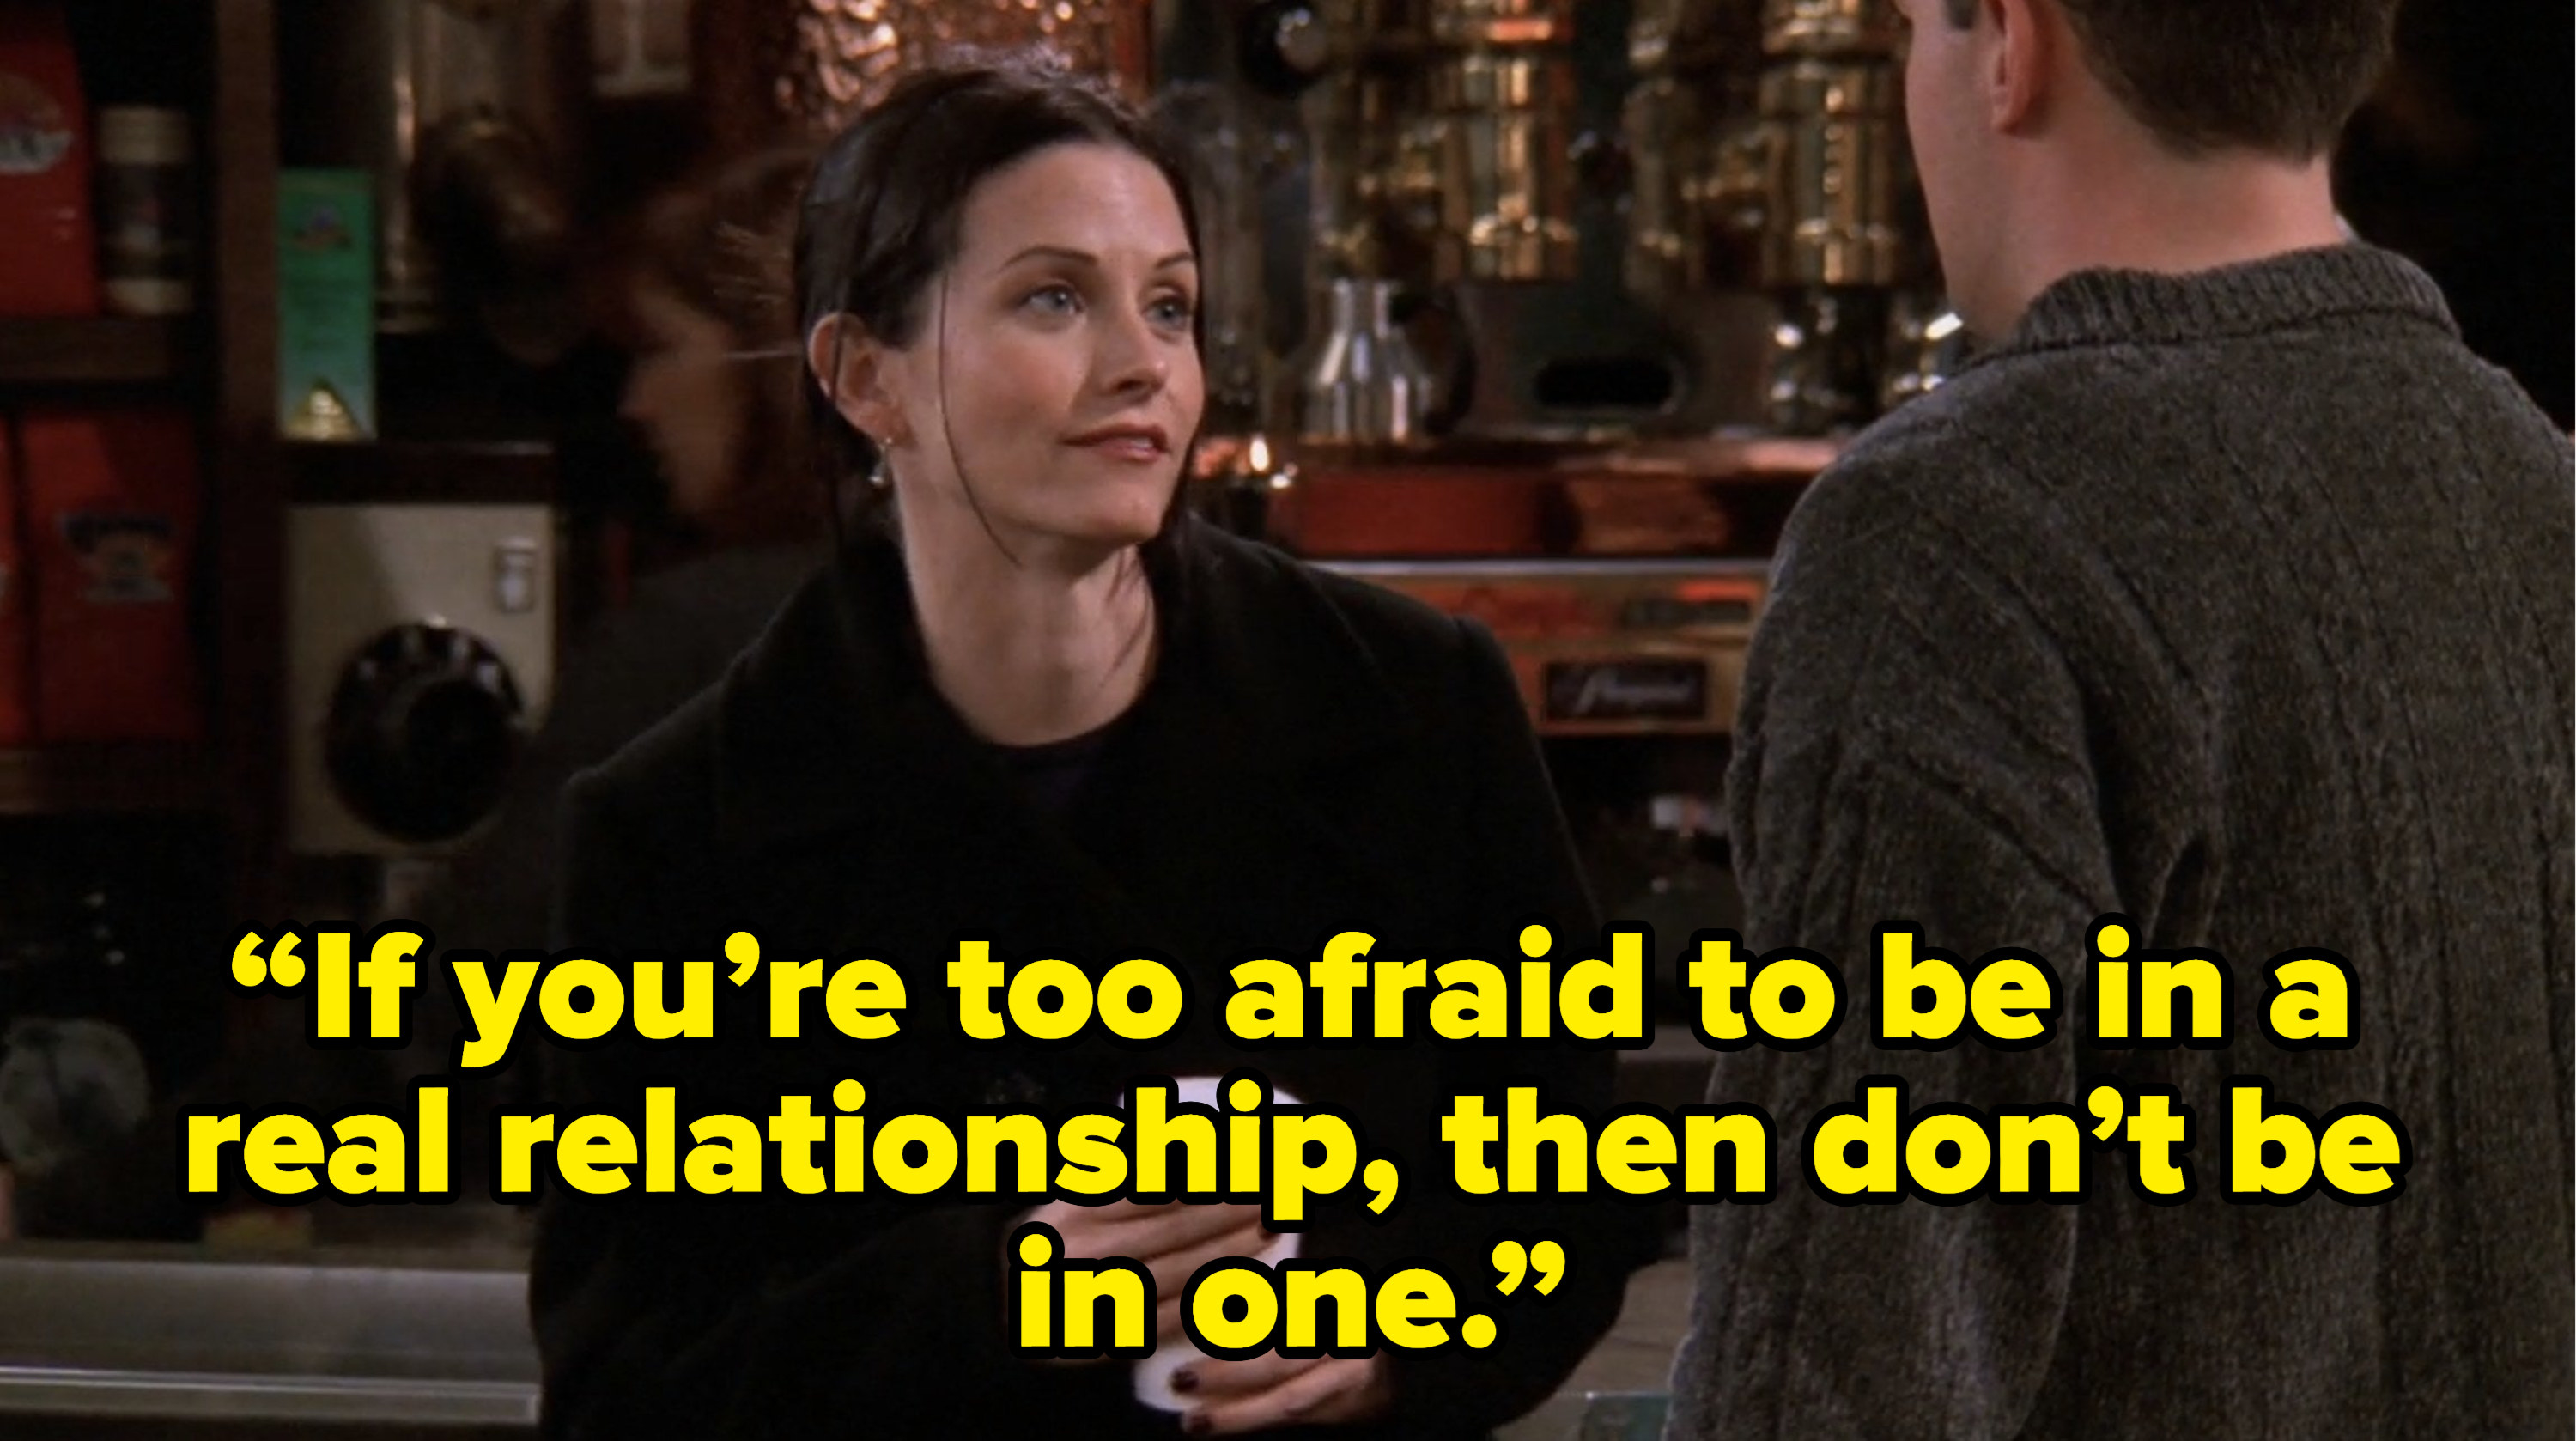 monica telling chandler “If you’re too afraid to be in a real relationship, then don’t be in one.” on friends